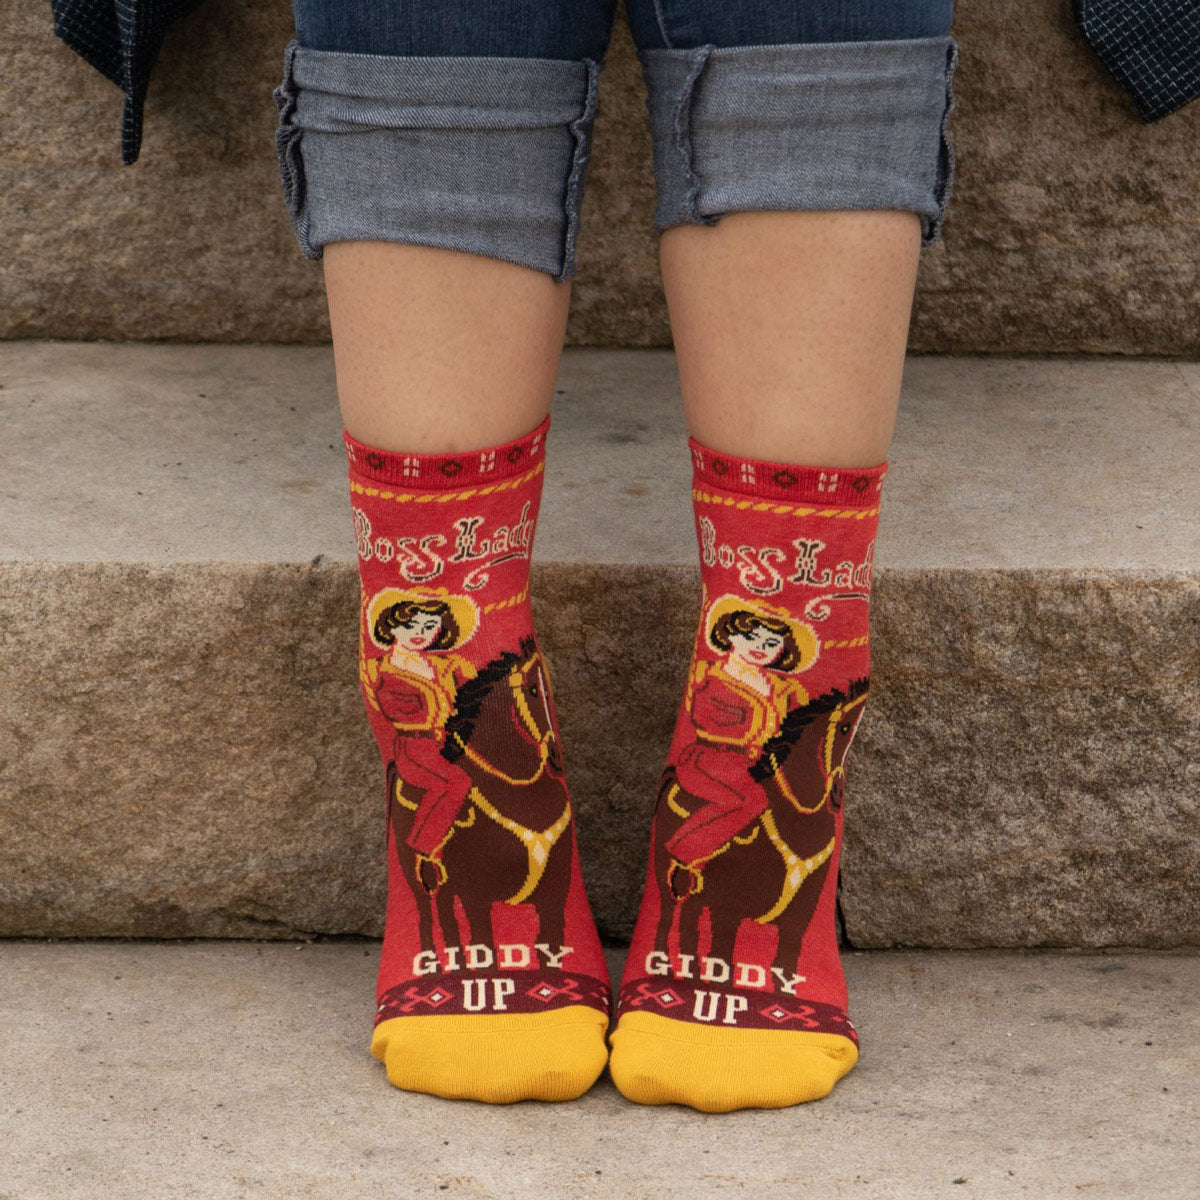 A person wears red socks with cowgirls riding horses and the words "Boss Lady"